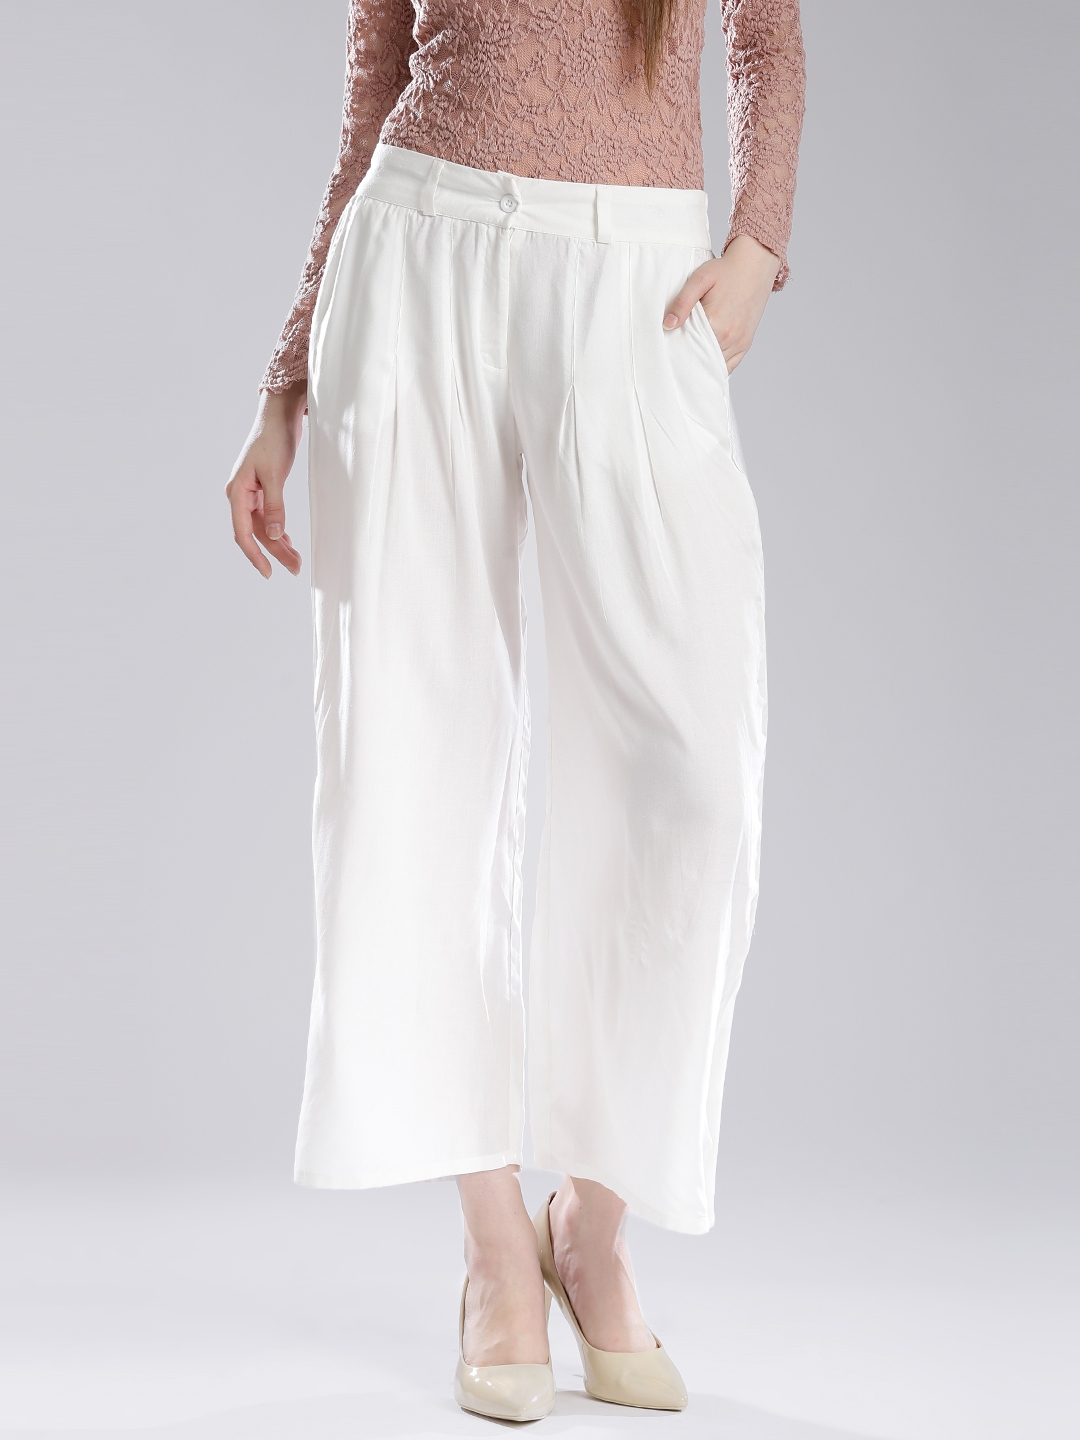 White Pleated Palazzo Pants Flared Work Casual Long Pants  Pants  Bottoms   Casual wide leg pants Pleated palazzo pants Wide leg